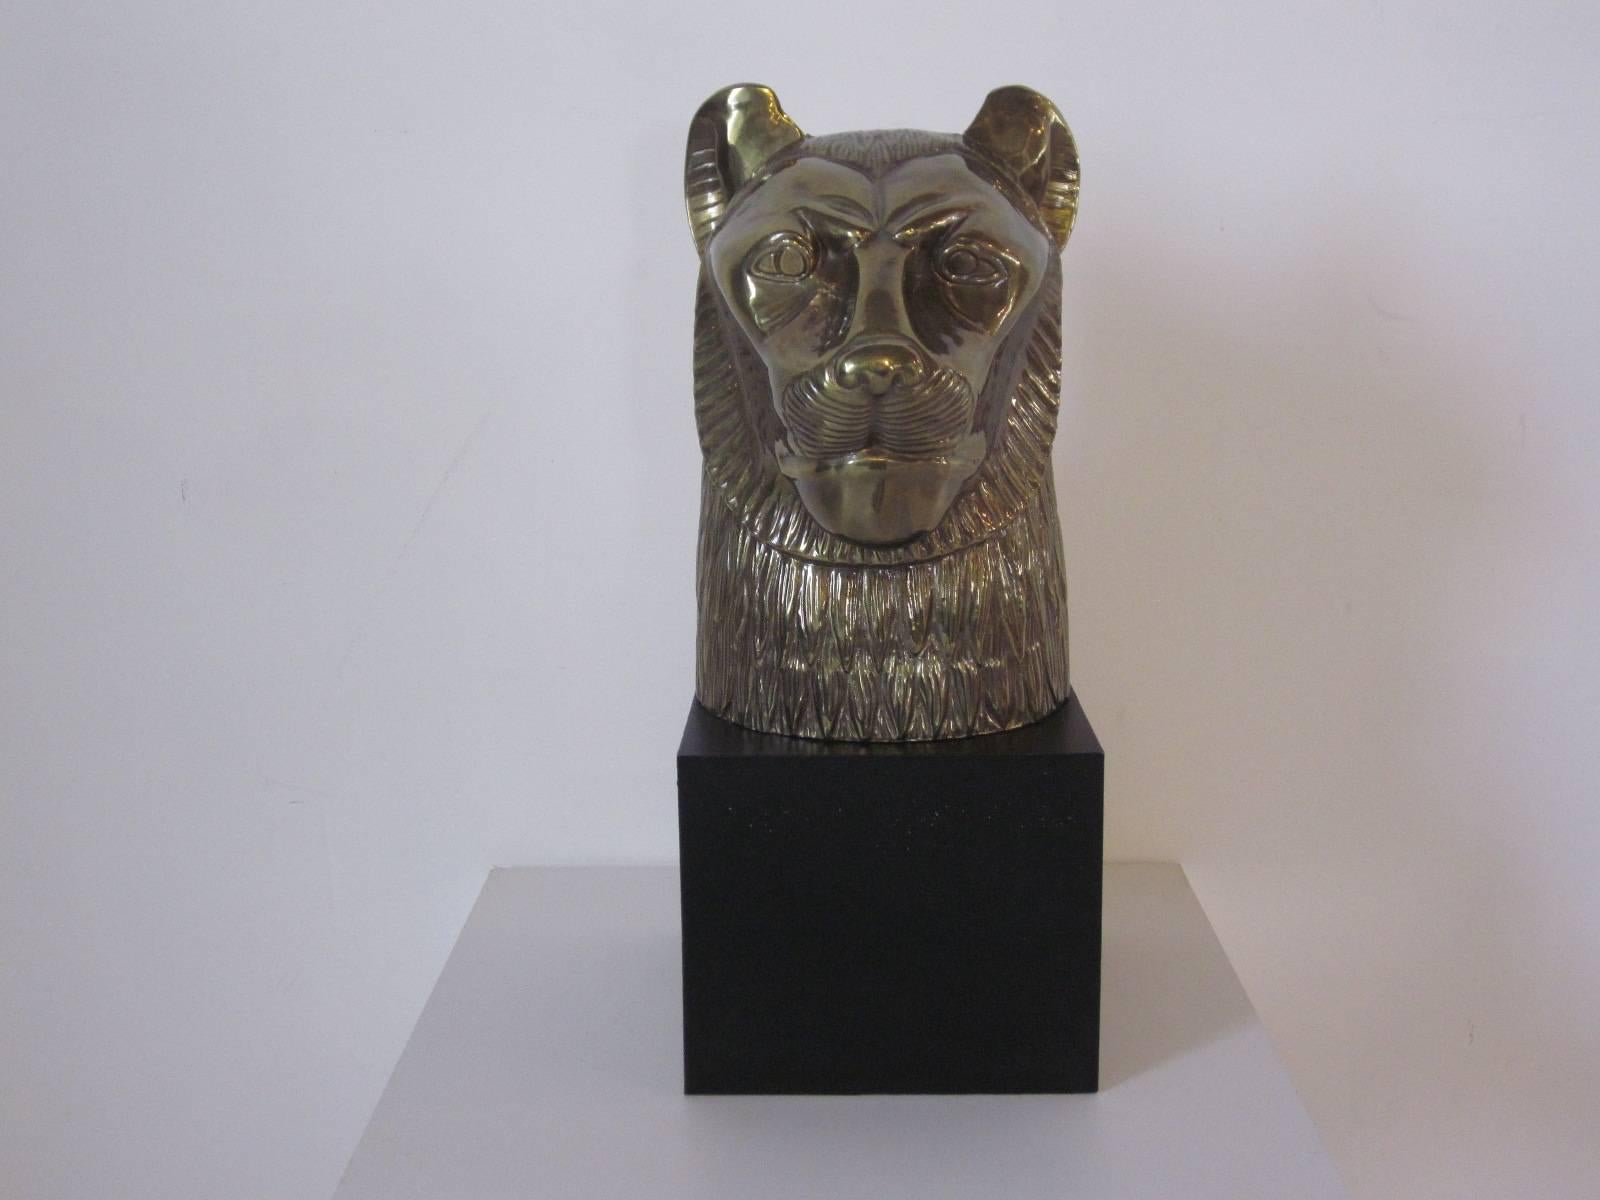 A large brass toned cat lion head sculpture in metal mounted on a satin black base with great detail and character , well crafted by the Chapman Company known for their high end quality  . The sculpture can be placed in the library , bookcase , desk